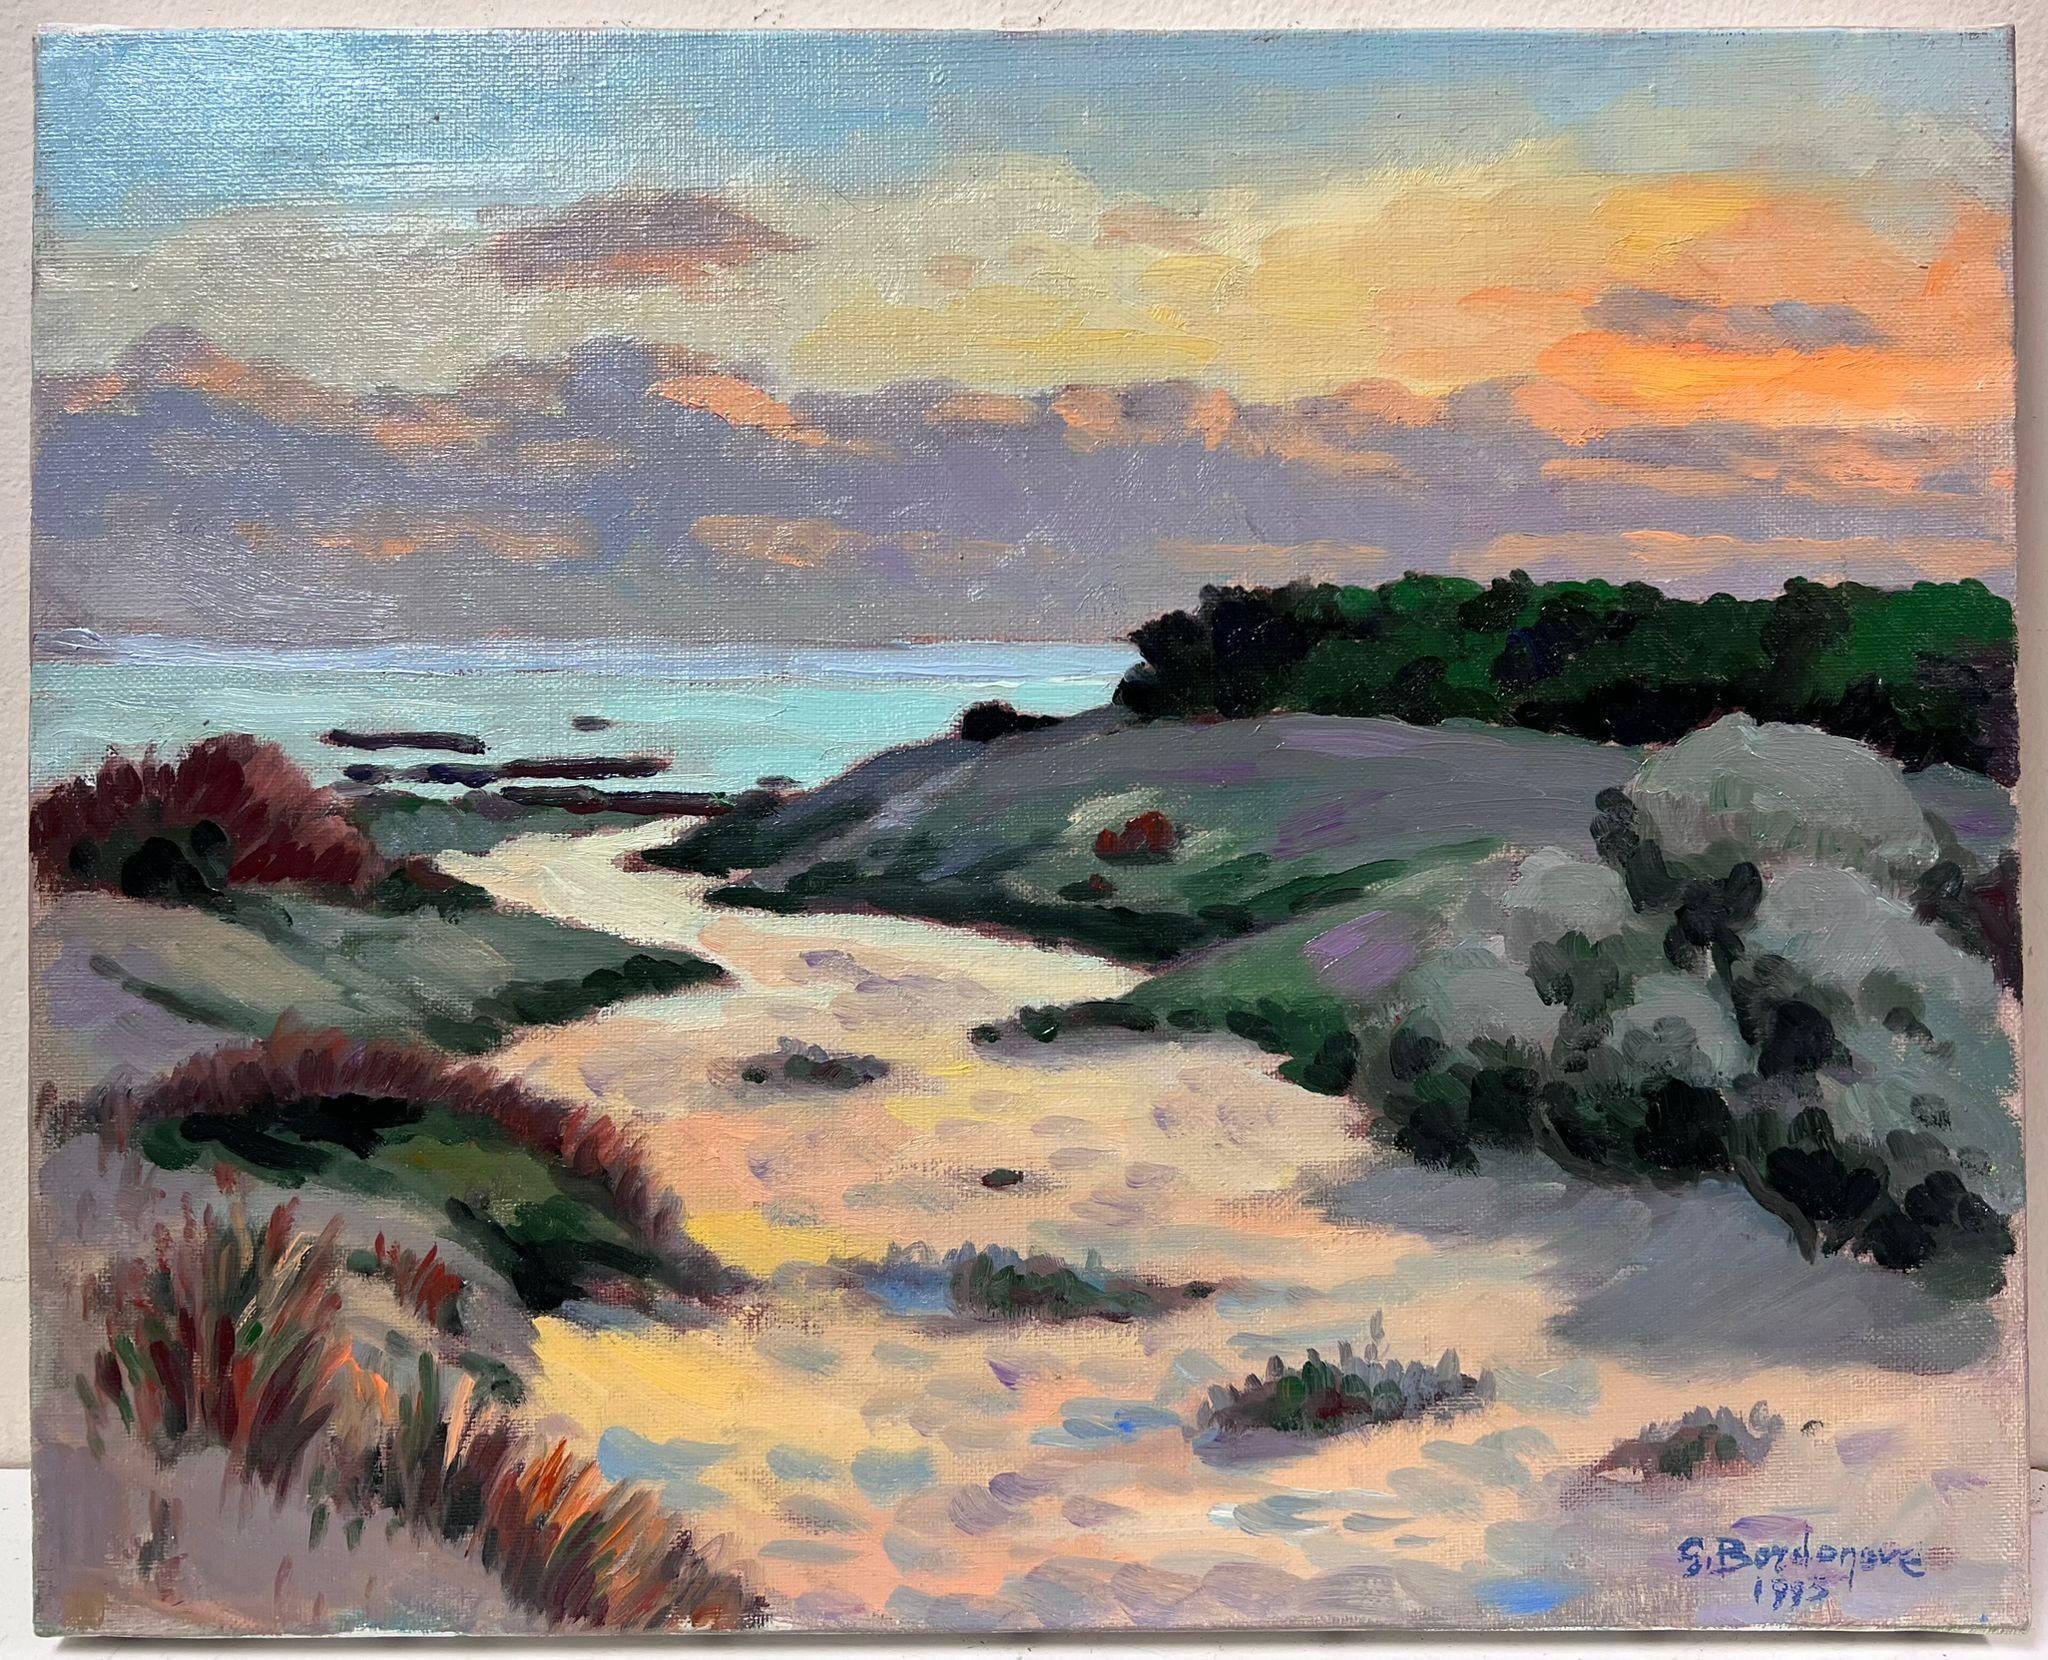 Contemporary French Impressionist Oil Sunset over Sea Sand Dunes Beach Pathway - Painting by Georges Bordonove